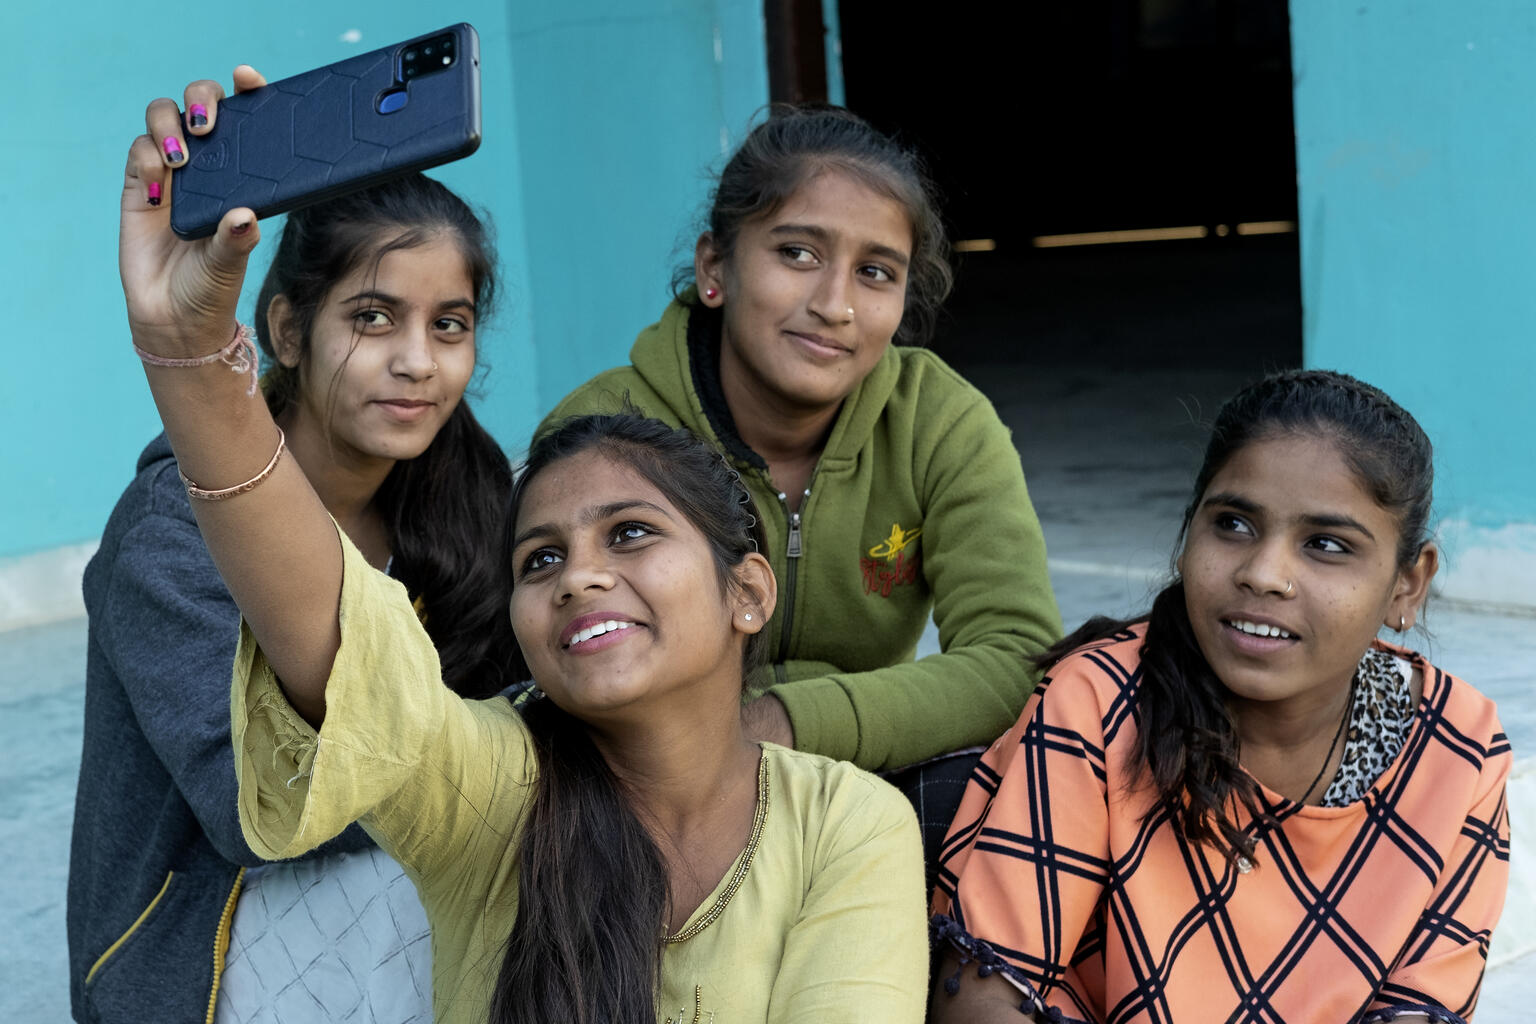 Children in India take photos on a phone.